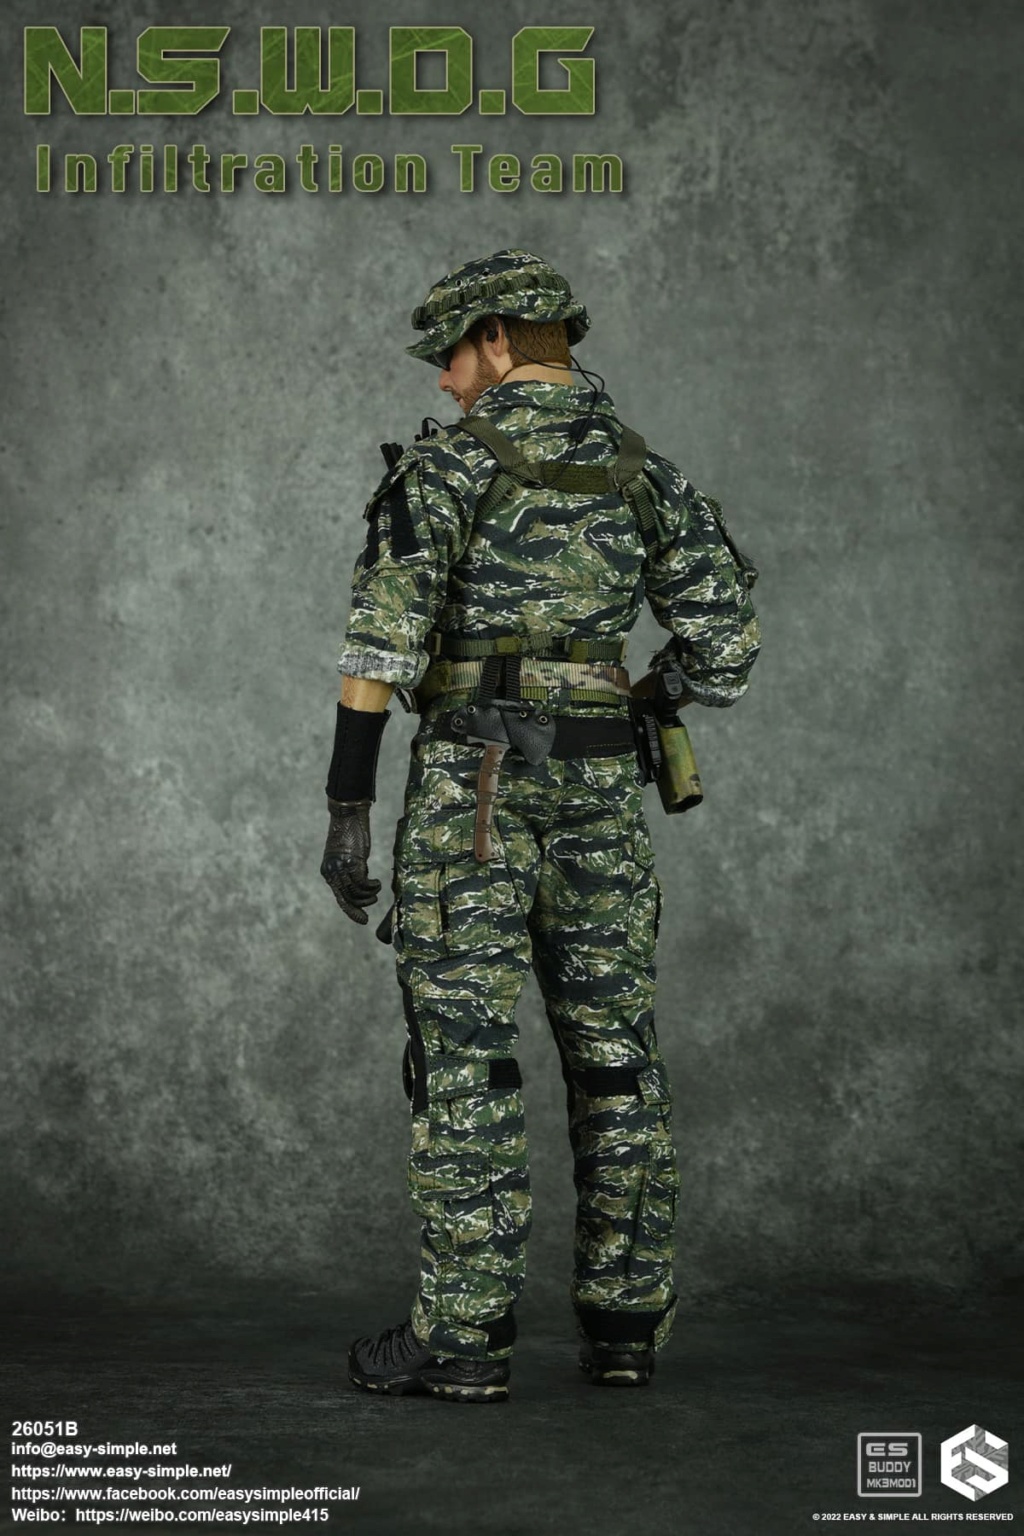 easy - NEW PRODUCT: EASY AND SIMPLE 1/6 SCALE FIGURE: N.S.W.D.G INFILTRATION TEAM - (2 Versions) 7603